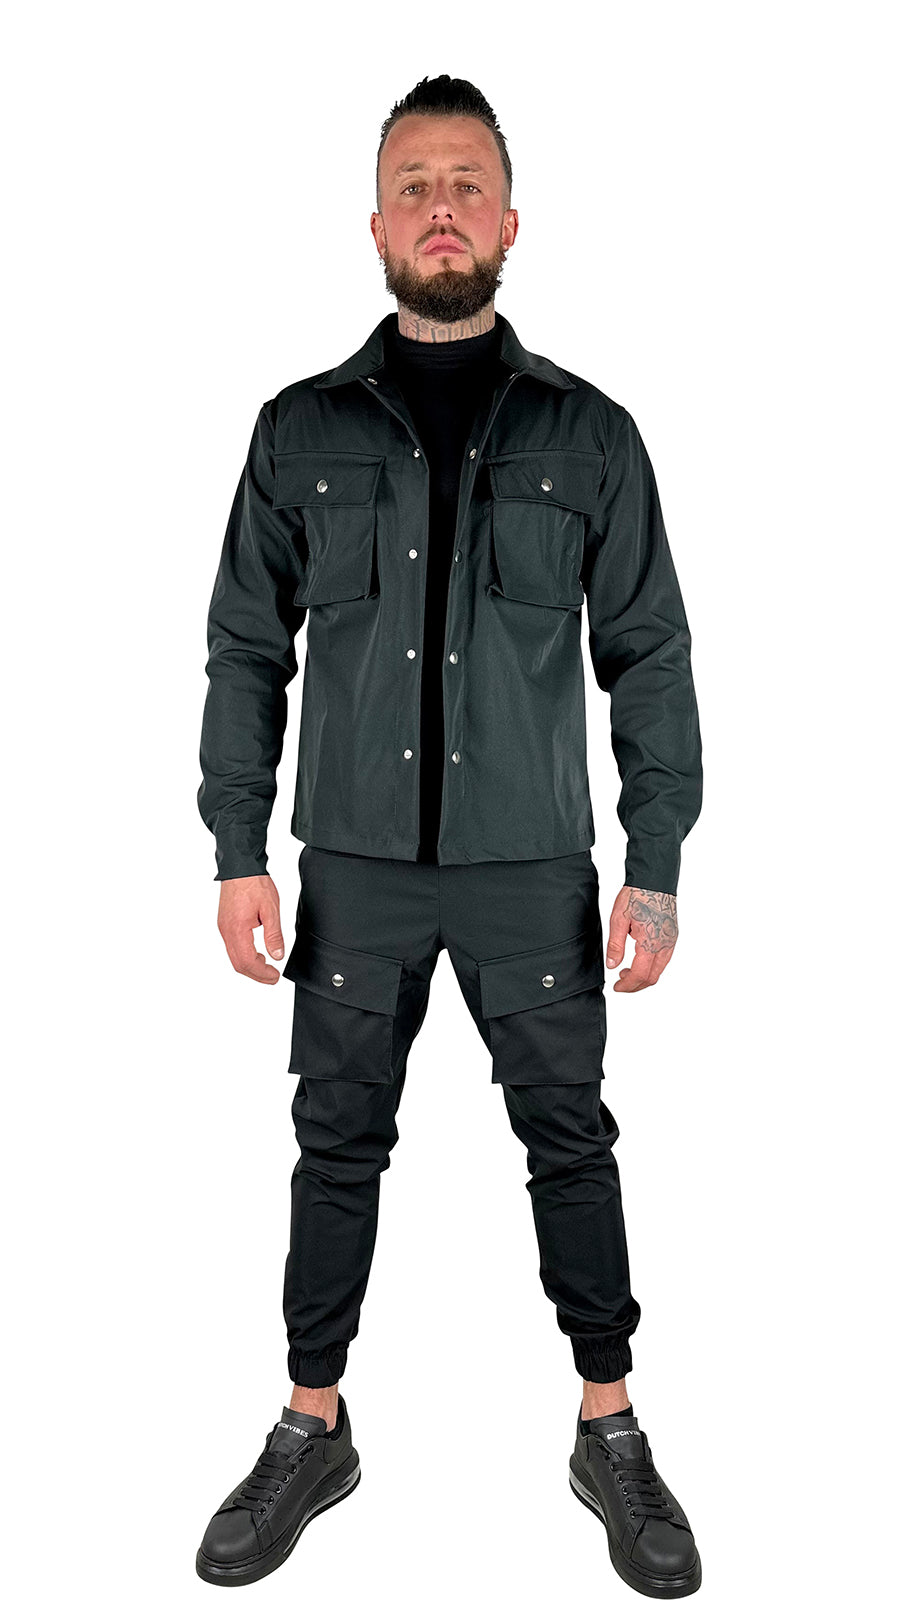 THE MIKES CARGO TRACK SUIT - BLACK